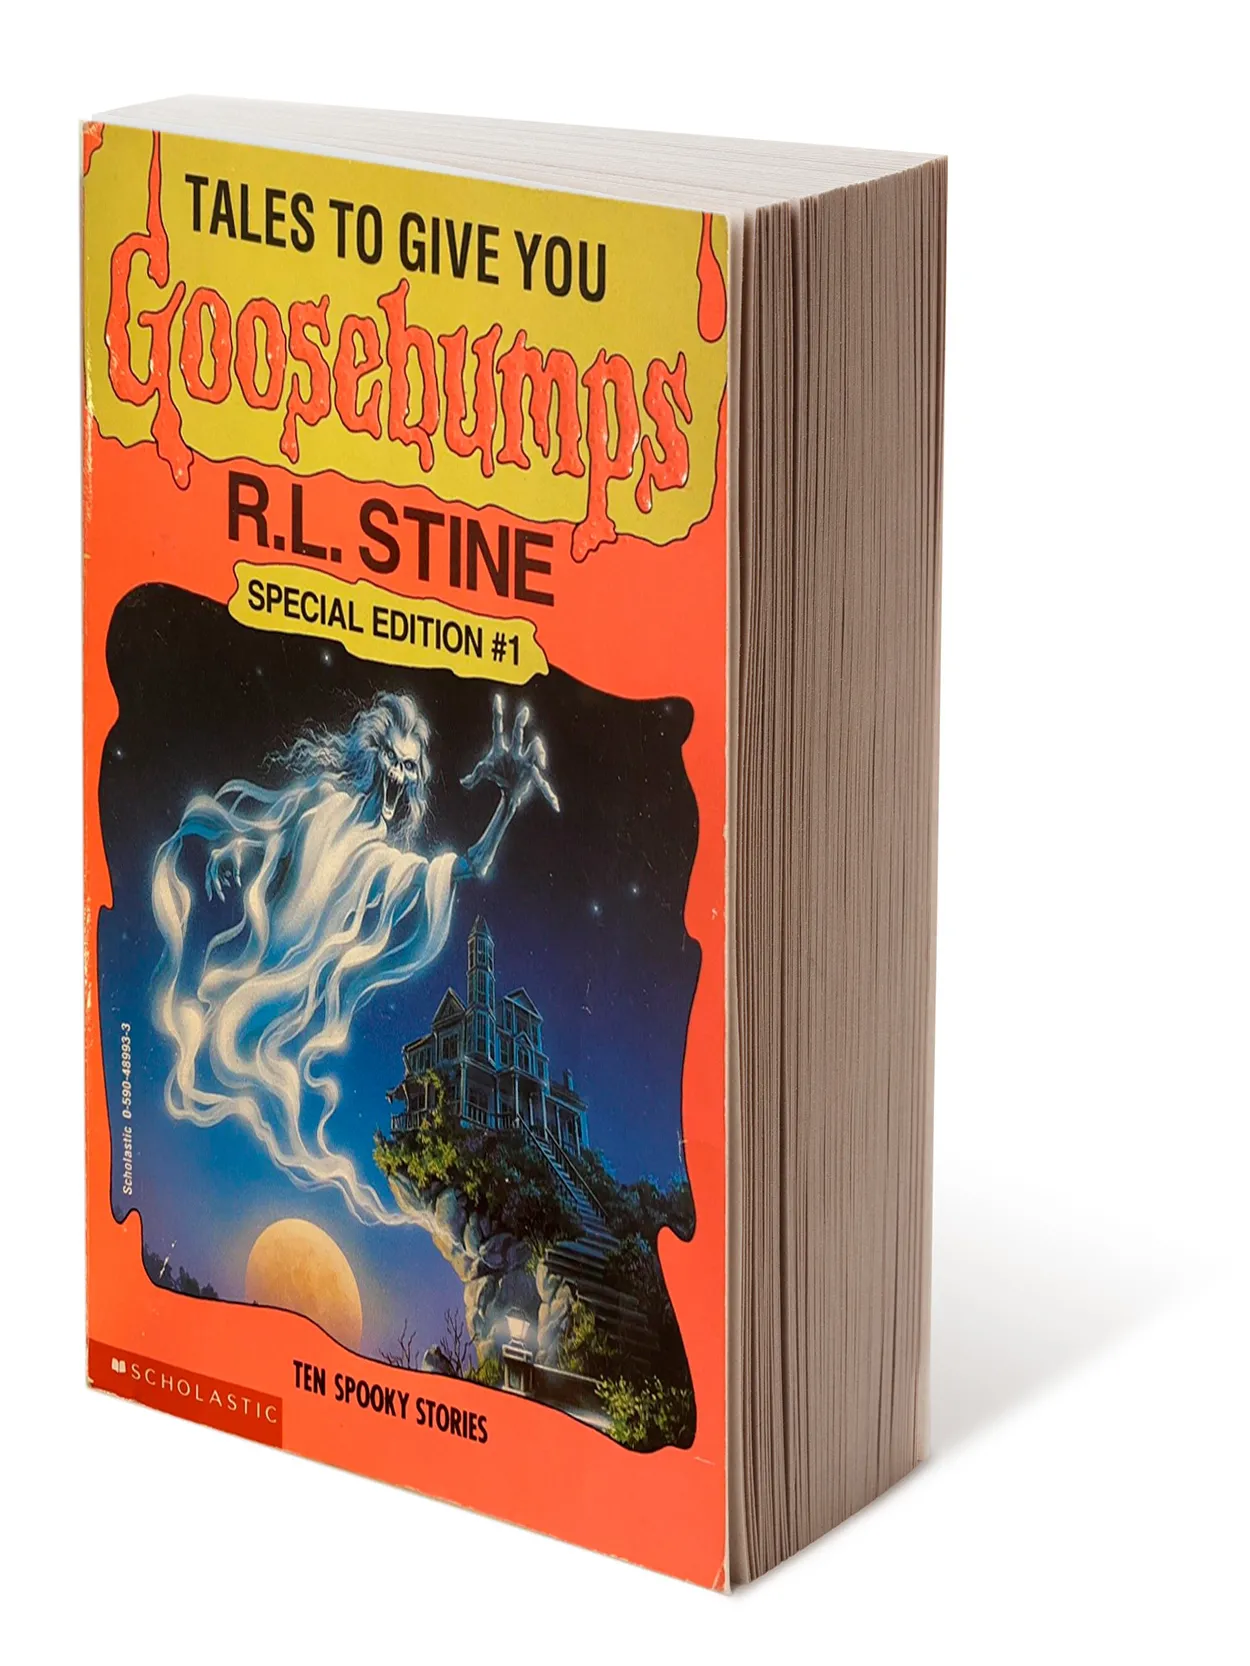 An old paperback book says: Tales to give you goosebumps, R.L. Stine, Special Edition number 1. It shows a ghostly spirit rising in front of a castle on a cliff and a full moon.